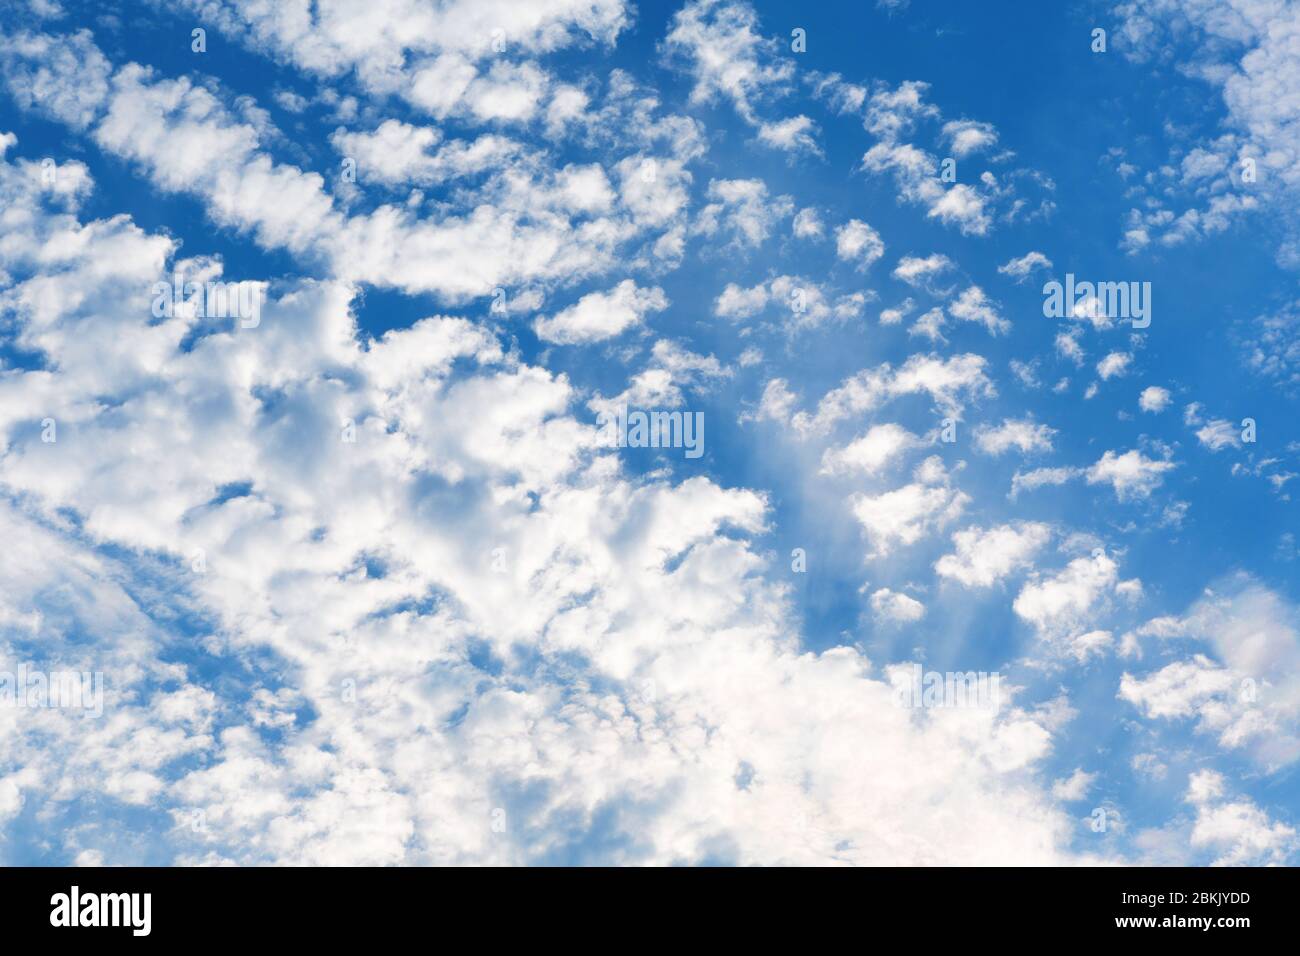 Blue sky with white cloud. Sky background with tiny clouds. Stock Photo